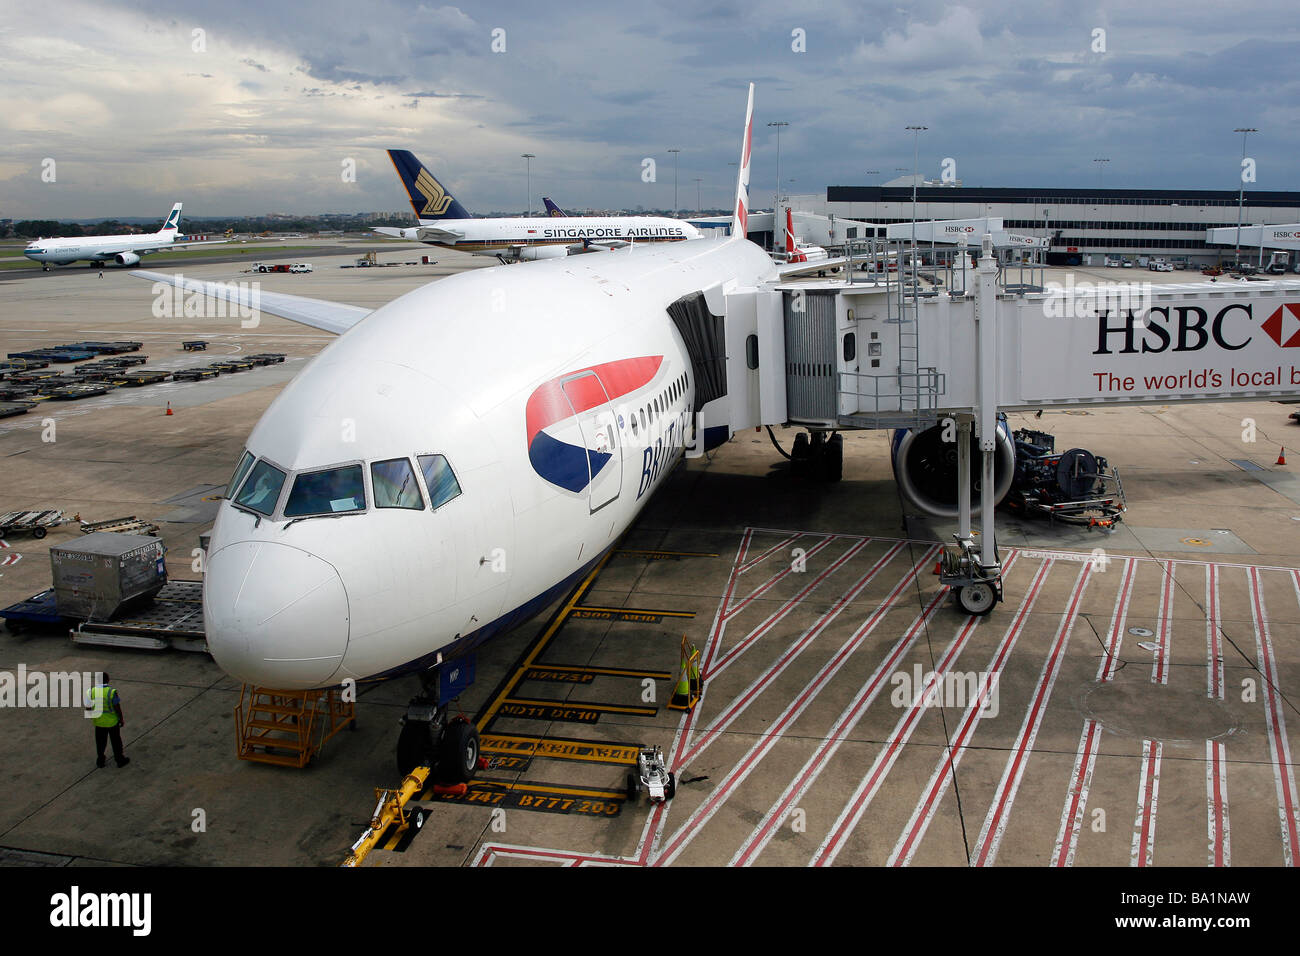 A British Airways Boeing 777-200 aircraft sits on the tarmac at Sydney ...